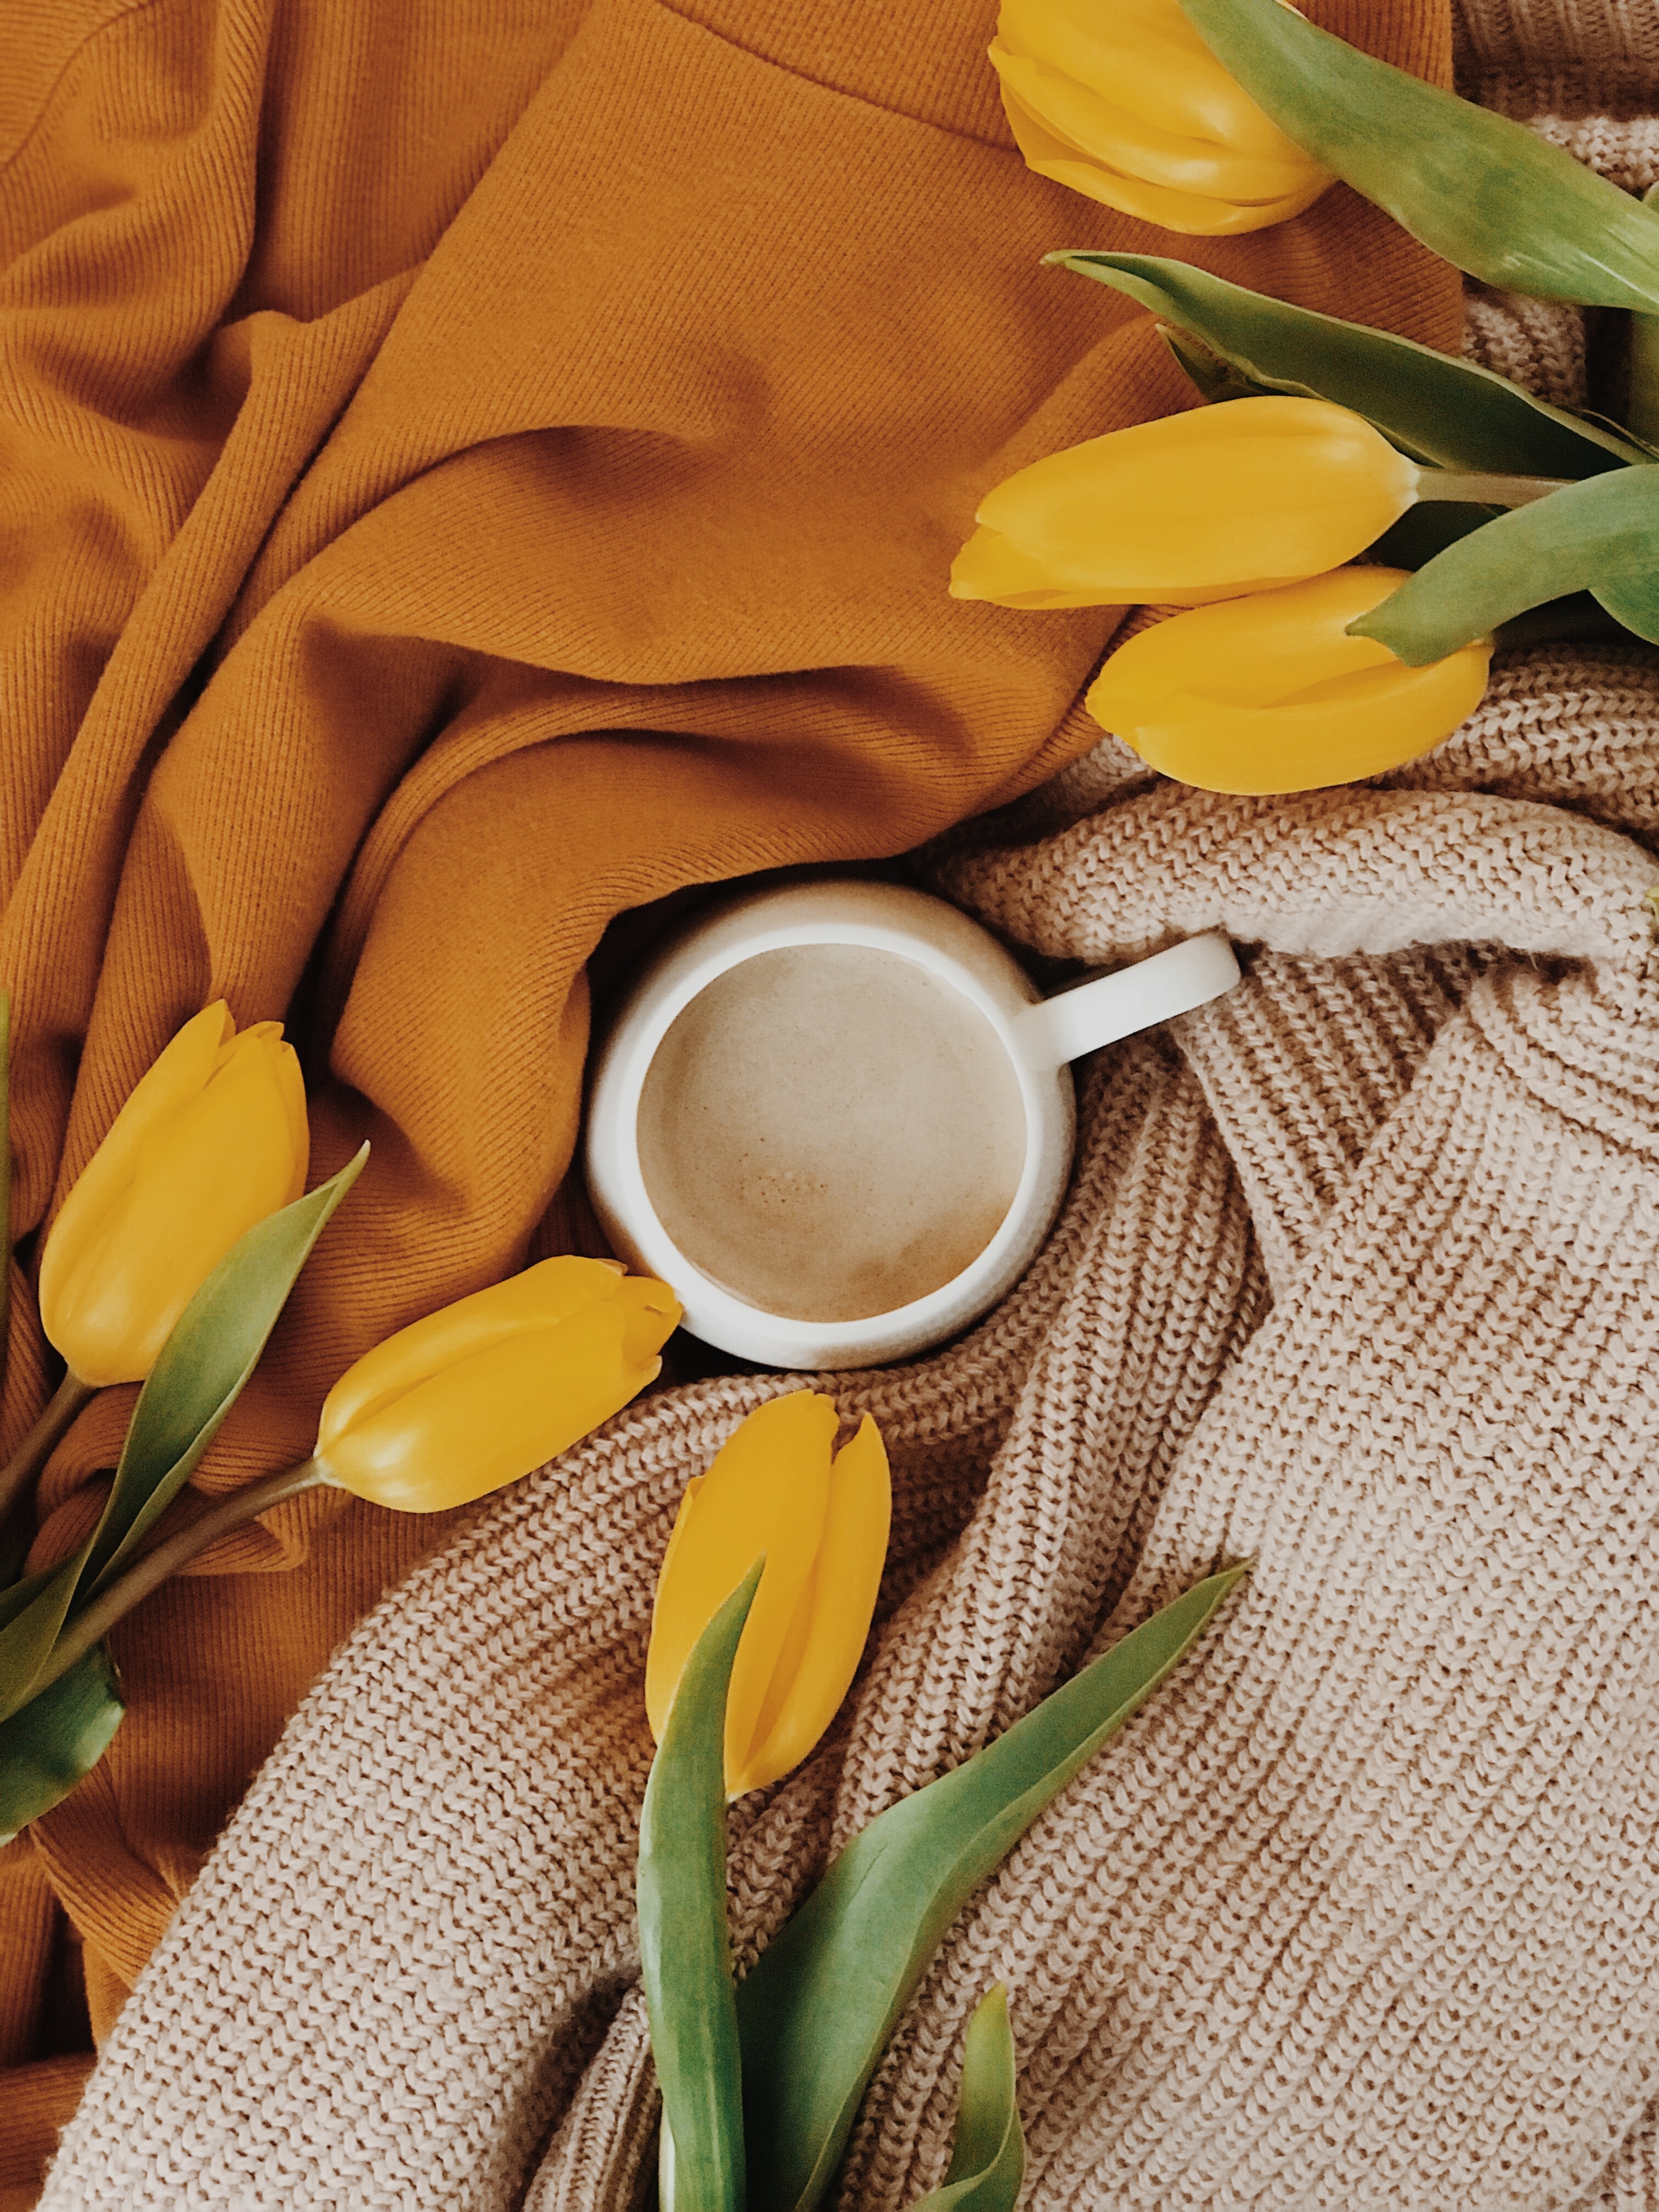 tulips, beverage, flowers, yellow, cup, drink images